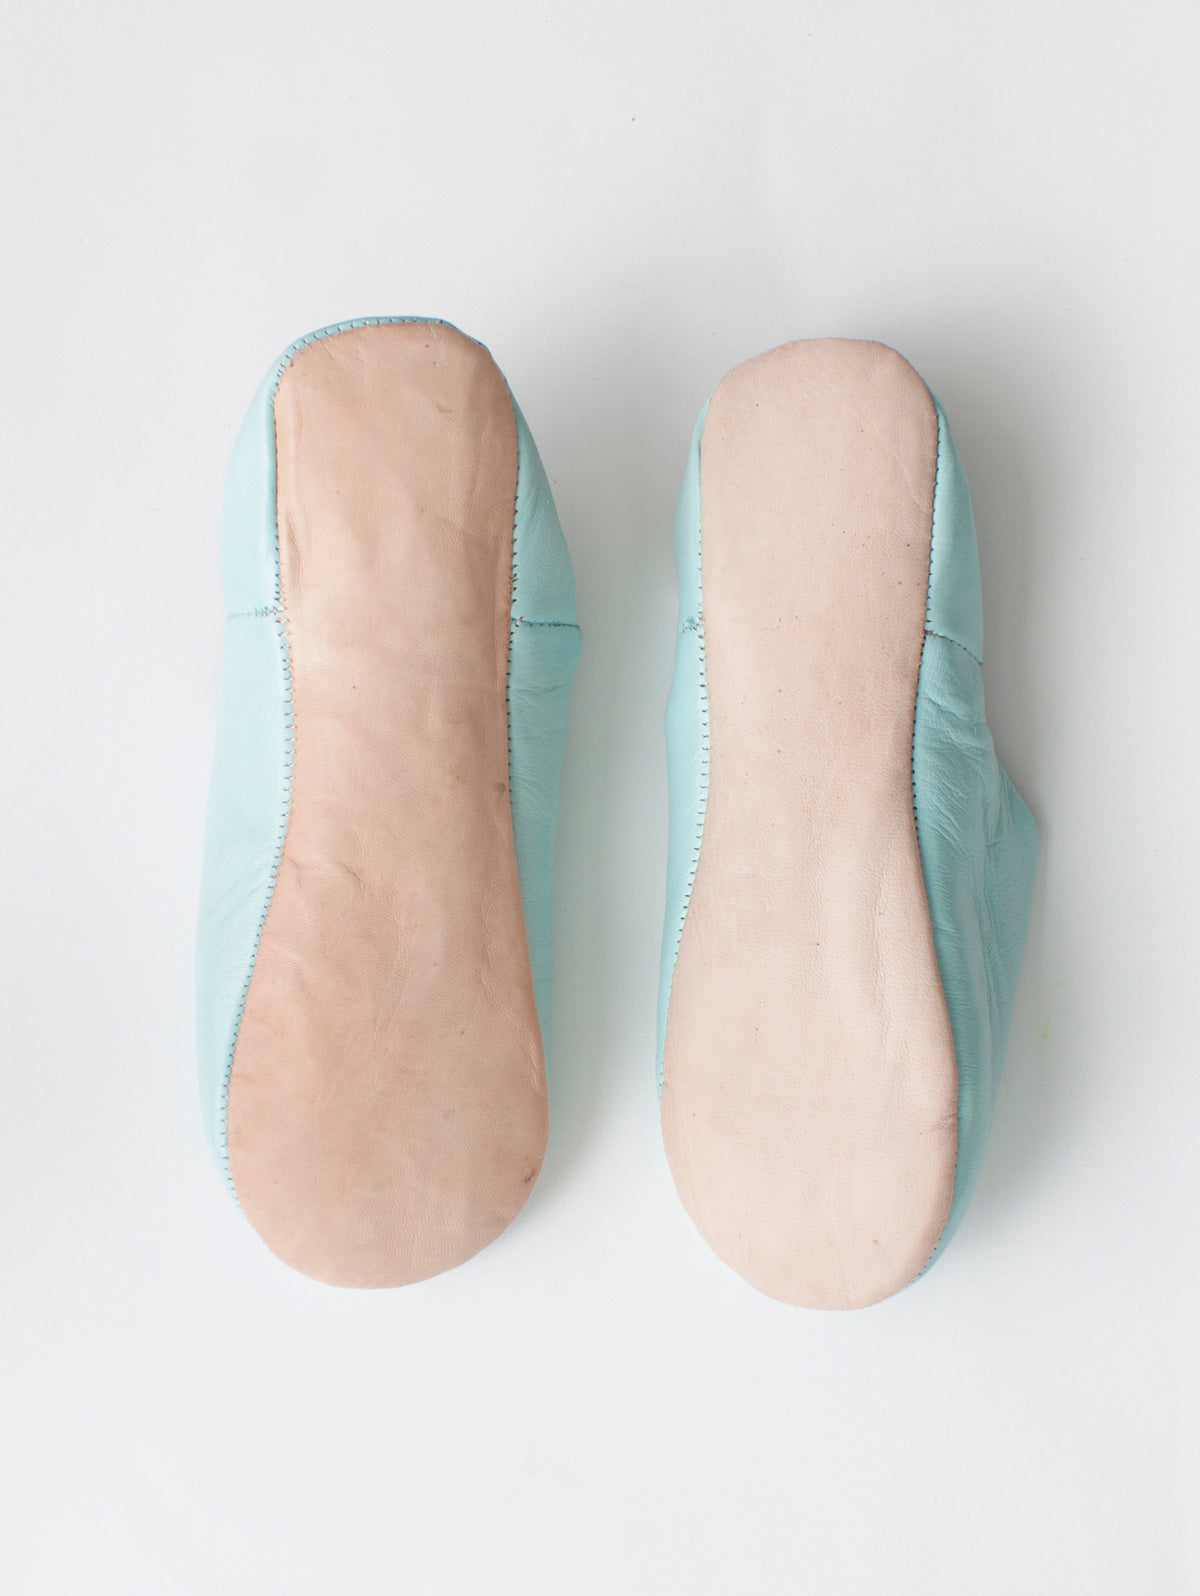 Moroccan Babouche Basic Slippers, Powder Blue